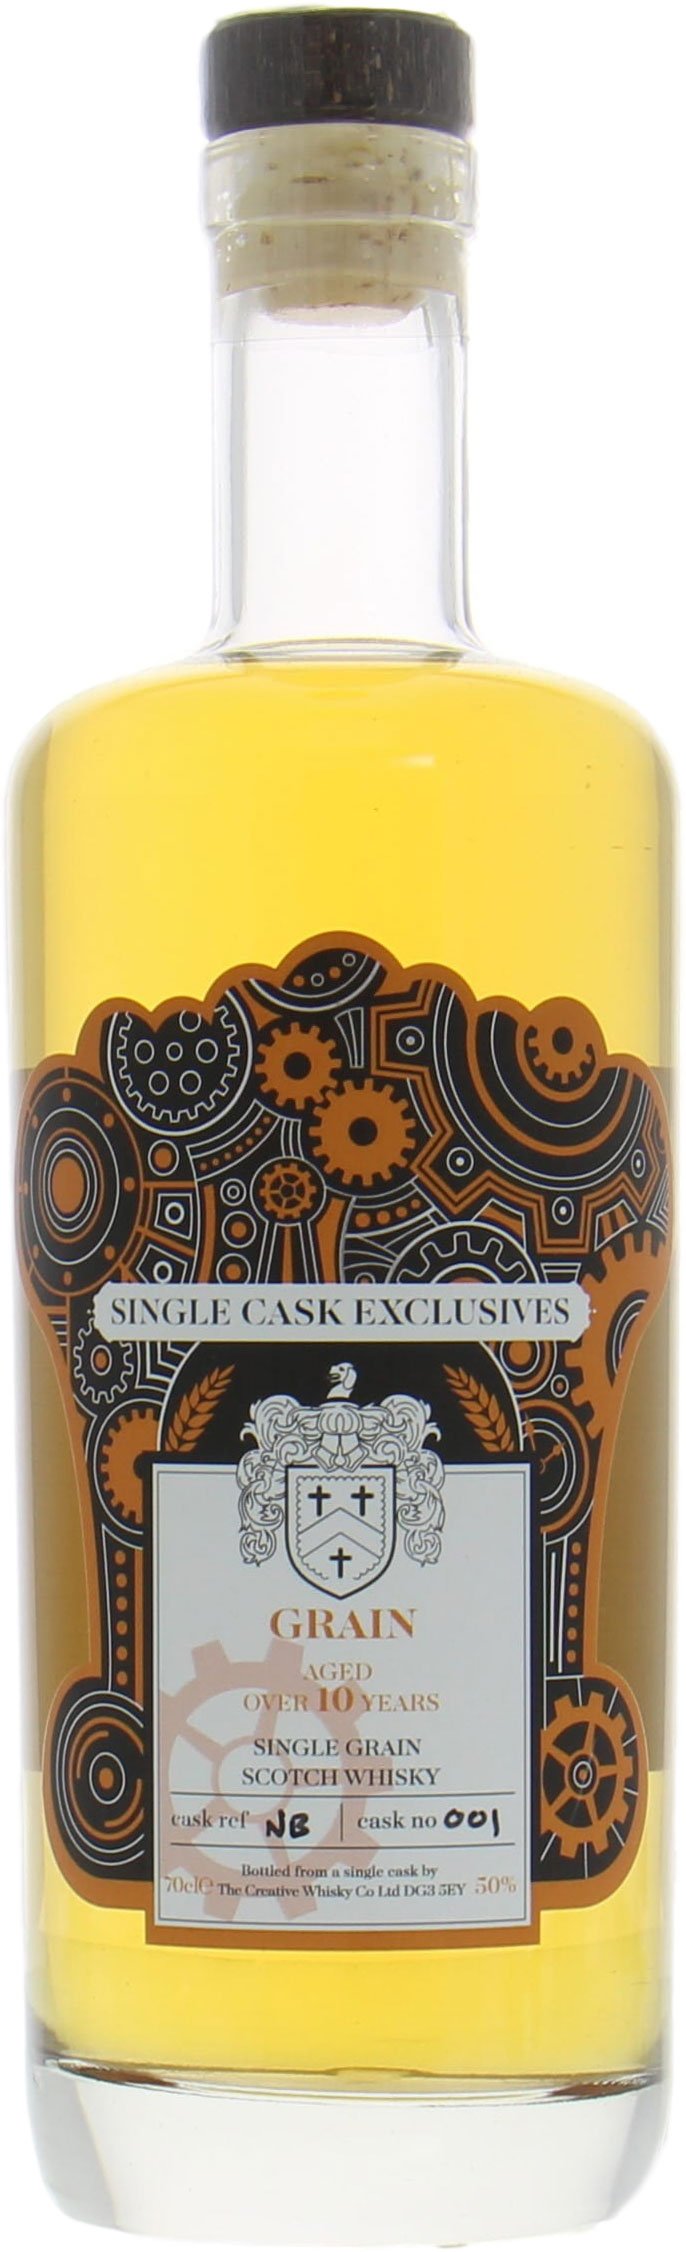 Grain - 10 Years Old Creative Whisky Company Single Cask Exclusives cask:NB001 50% NV